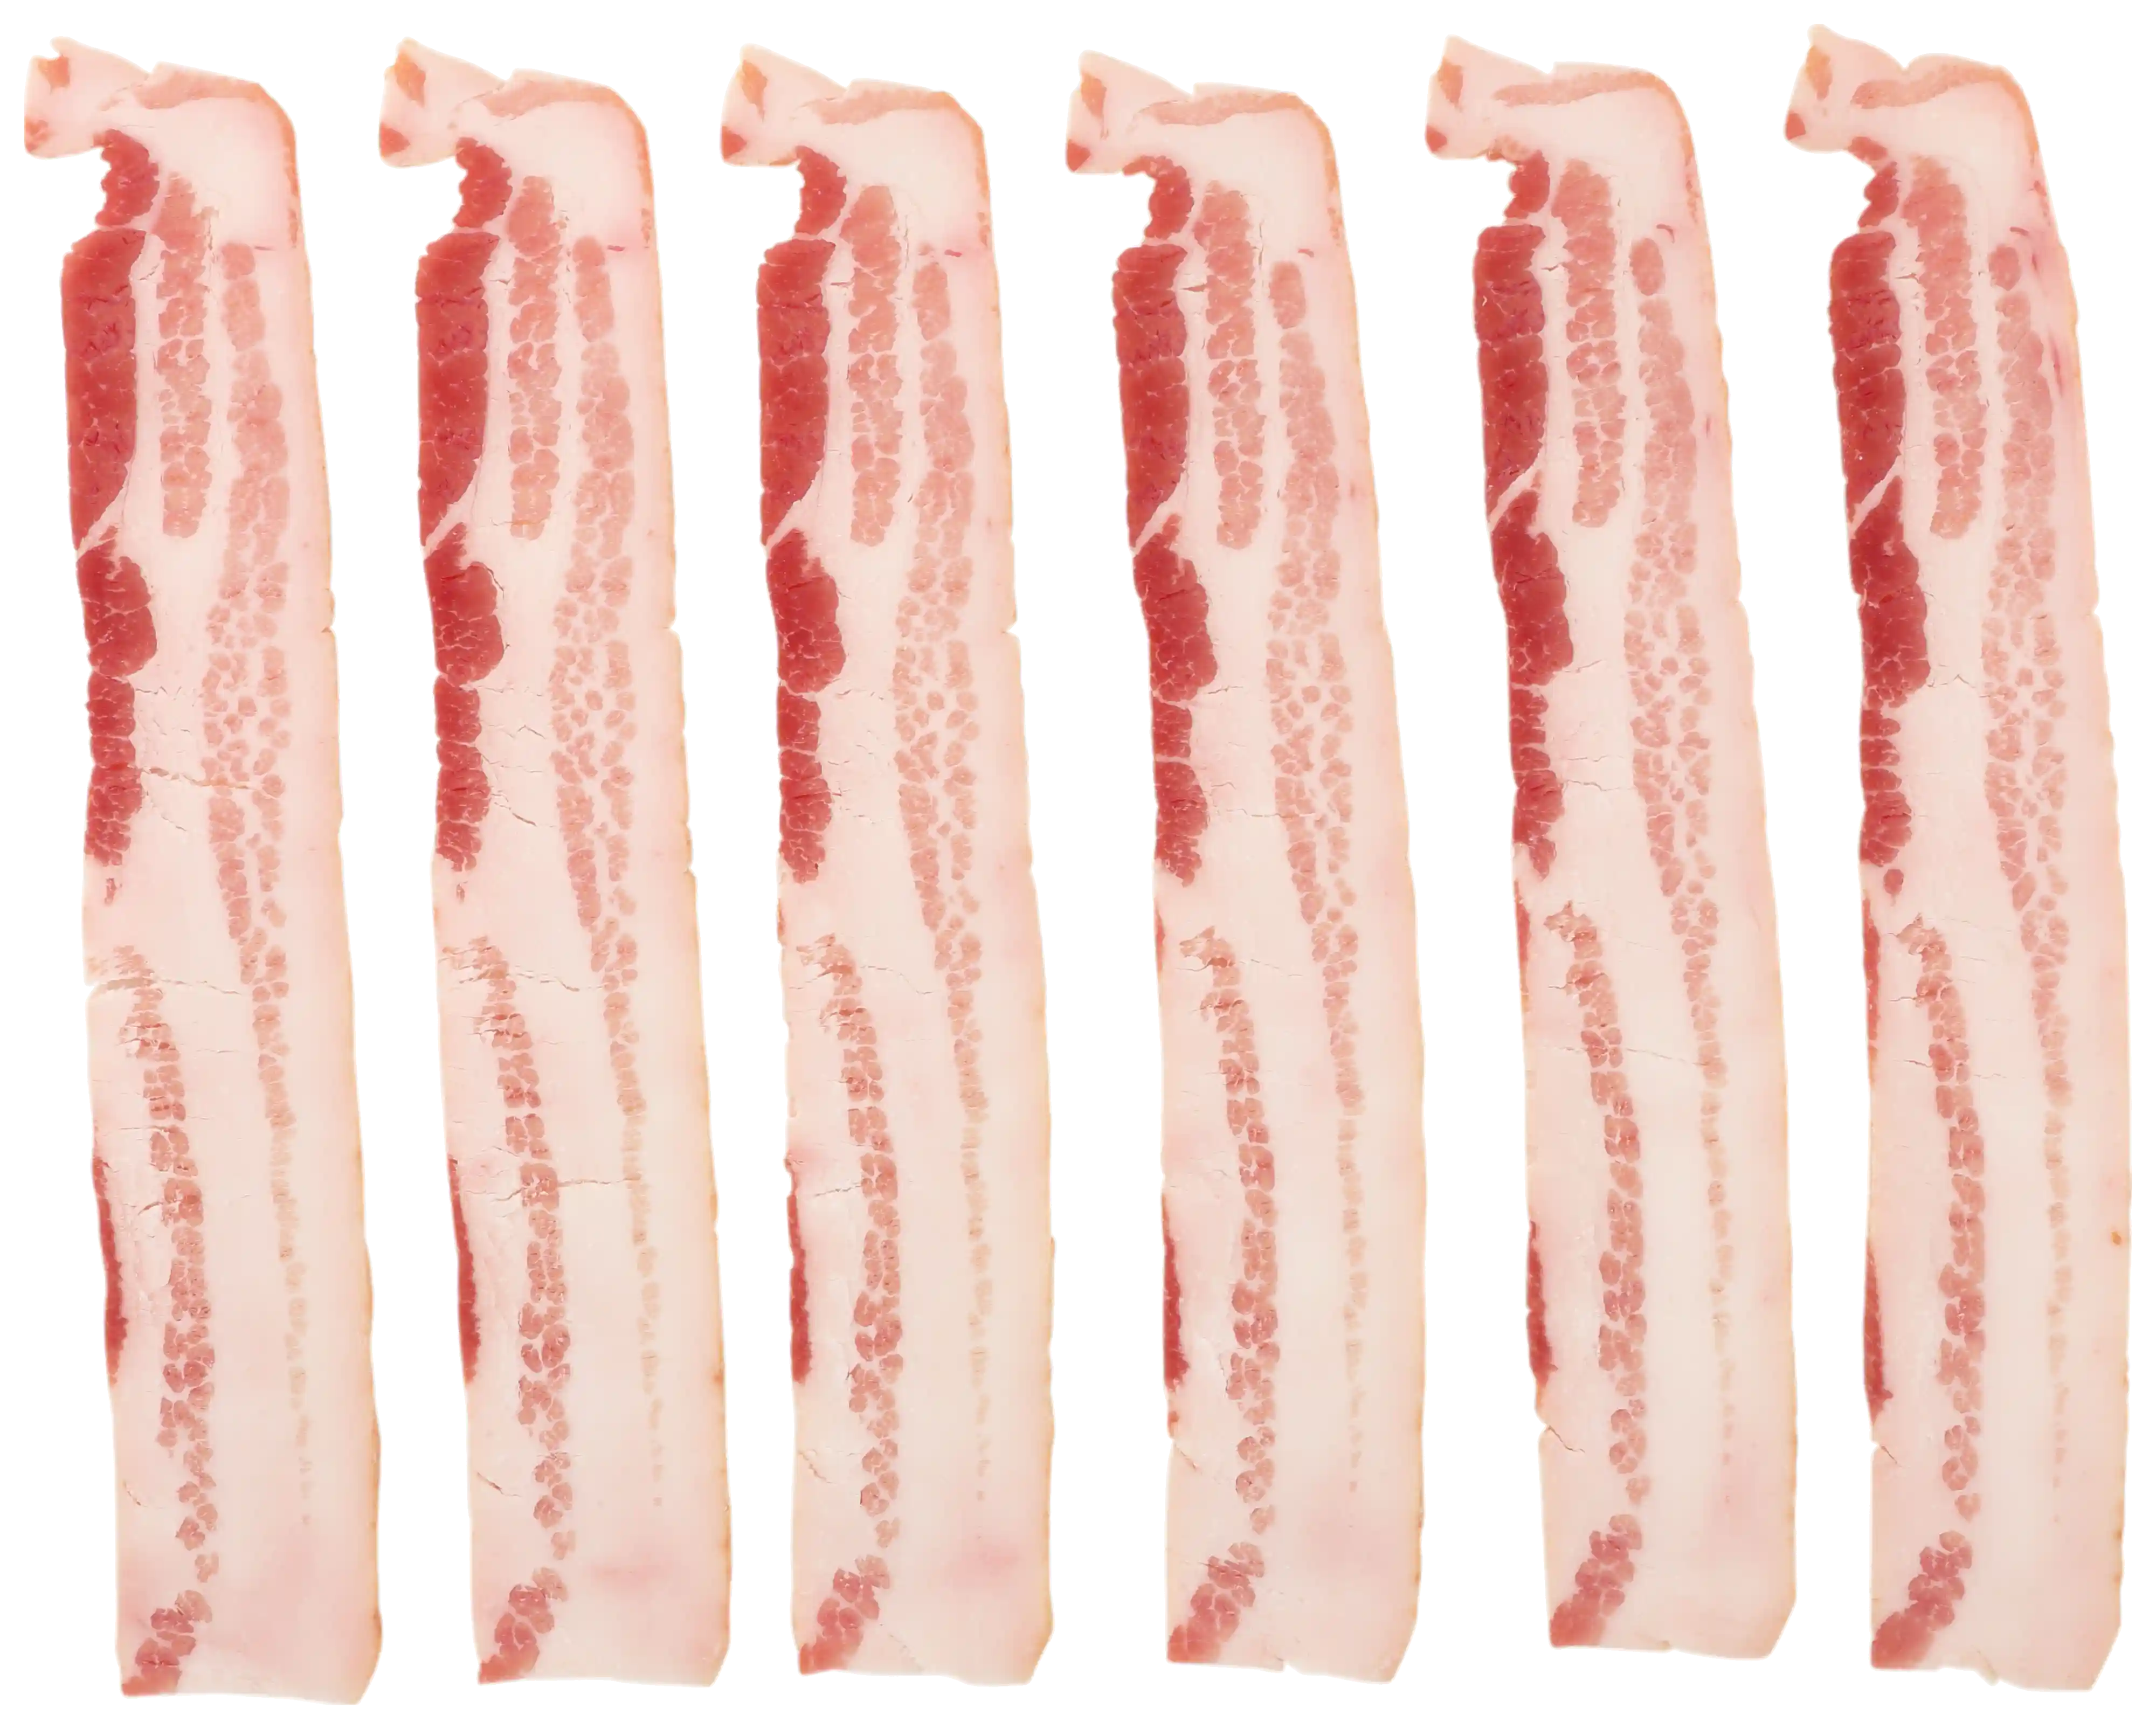 Wright® Brand Naturally Hickory Smoked Regular Sliced Bacon, Bulk, 15 Lbs, 14-18 Slices per Pound, Frozen_image_21